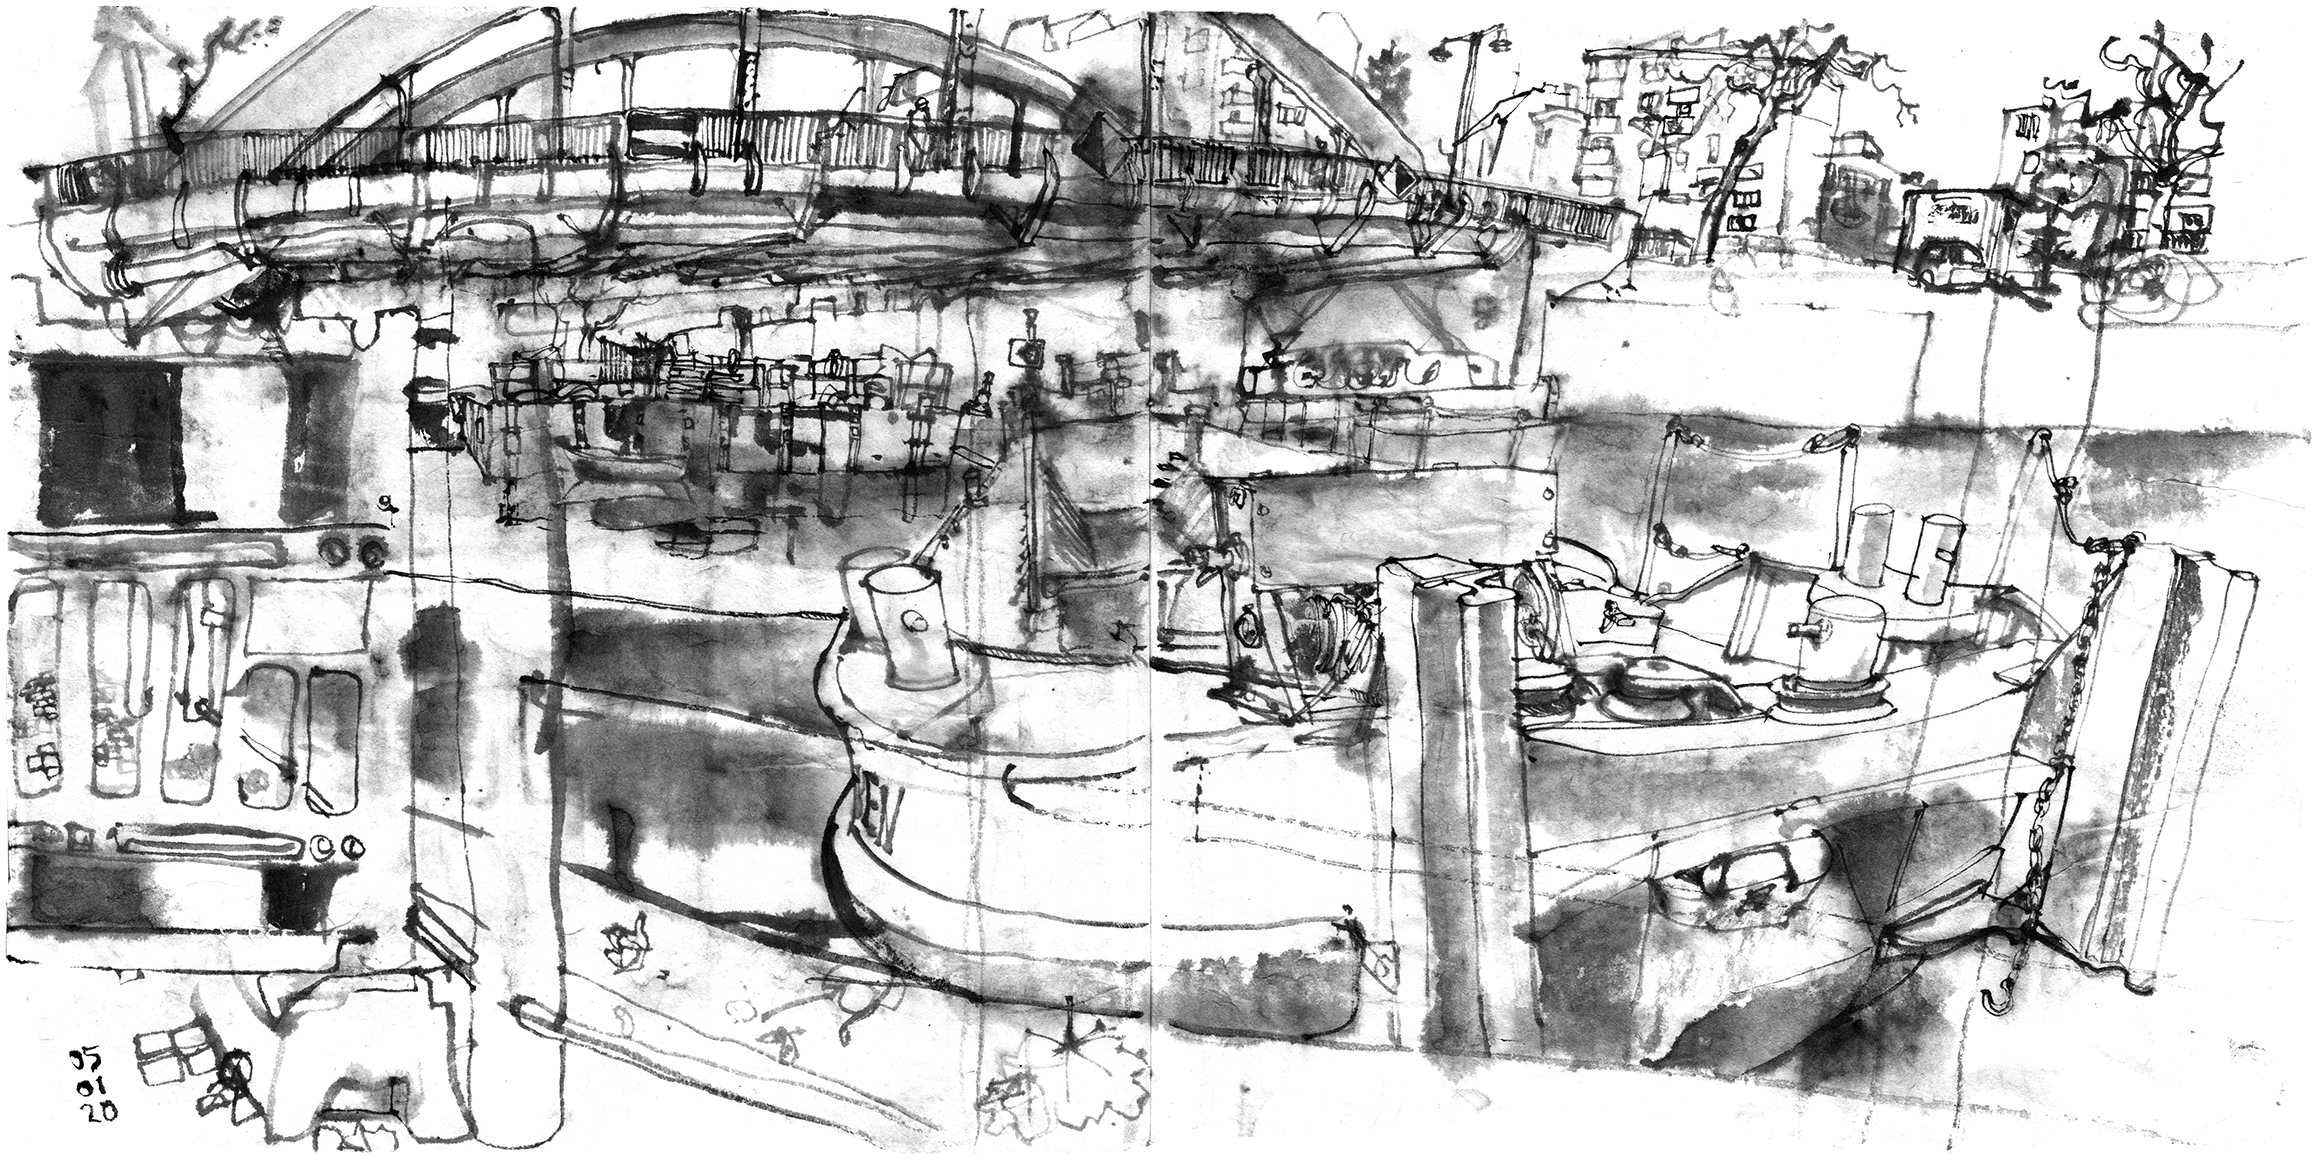 Ink drawing from a riverside, a bridge in the back. Underneath the bridge is a Ponton with building material. A barge in front is moored to poles at the bank.